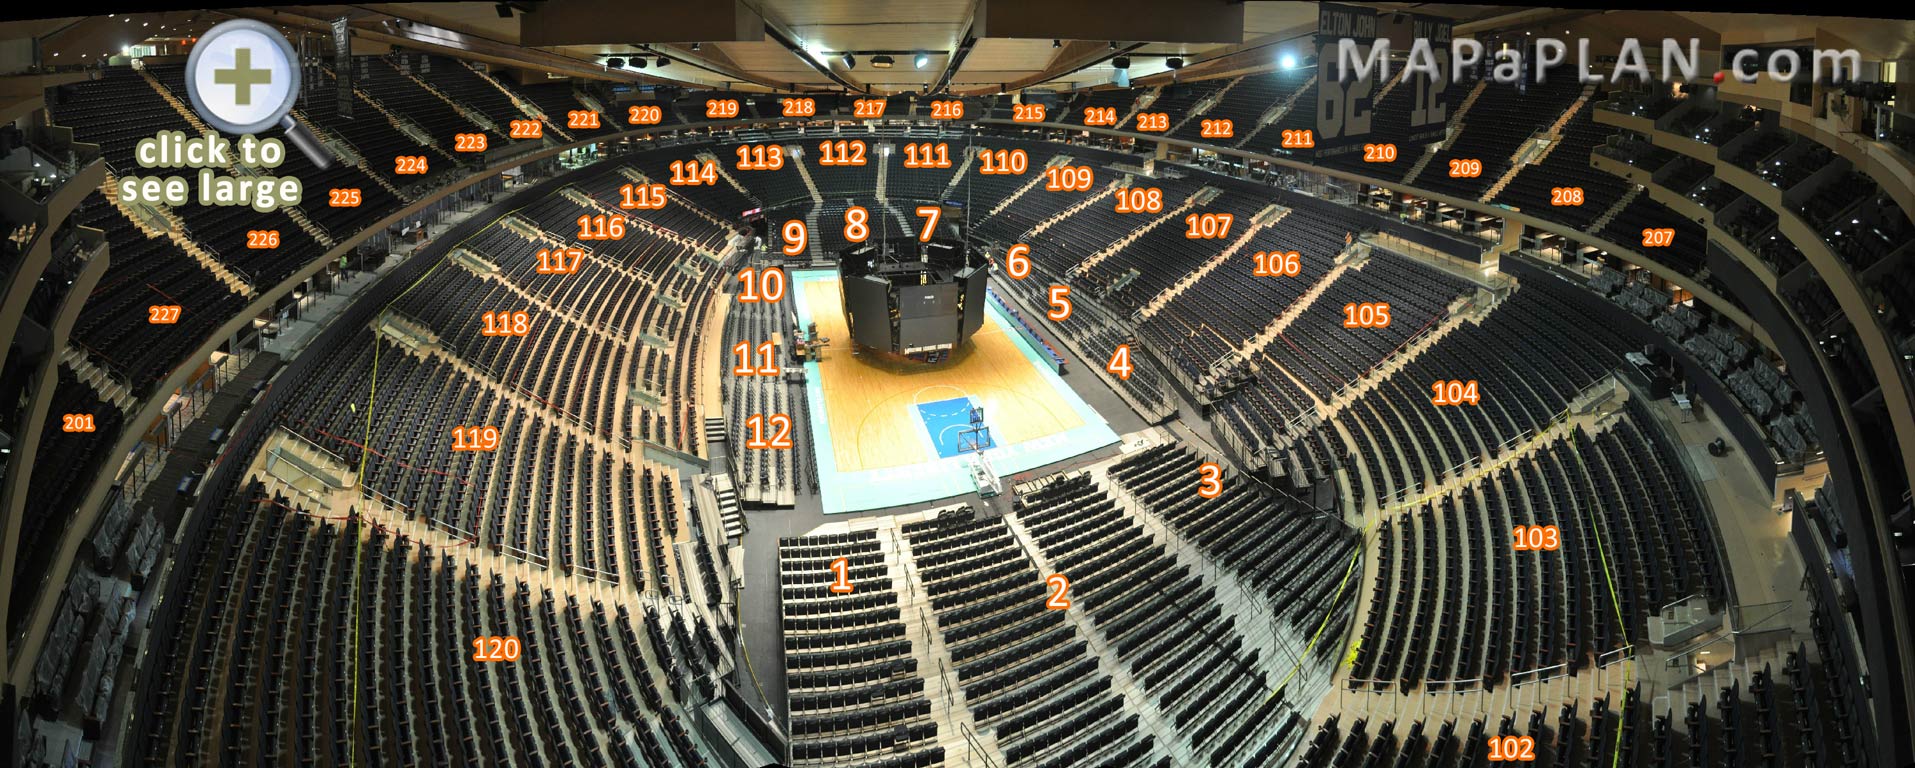 Madison square garden seating chart Interactive basketball 3d panoramic photo